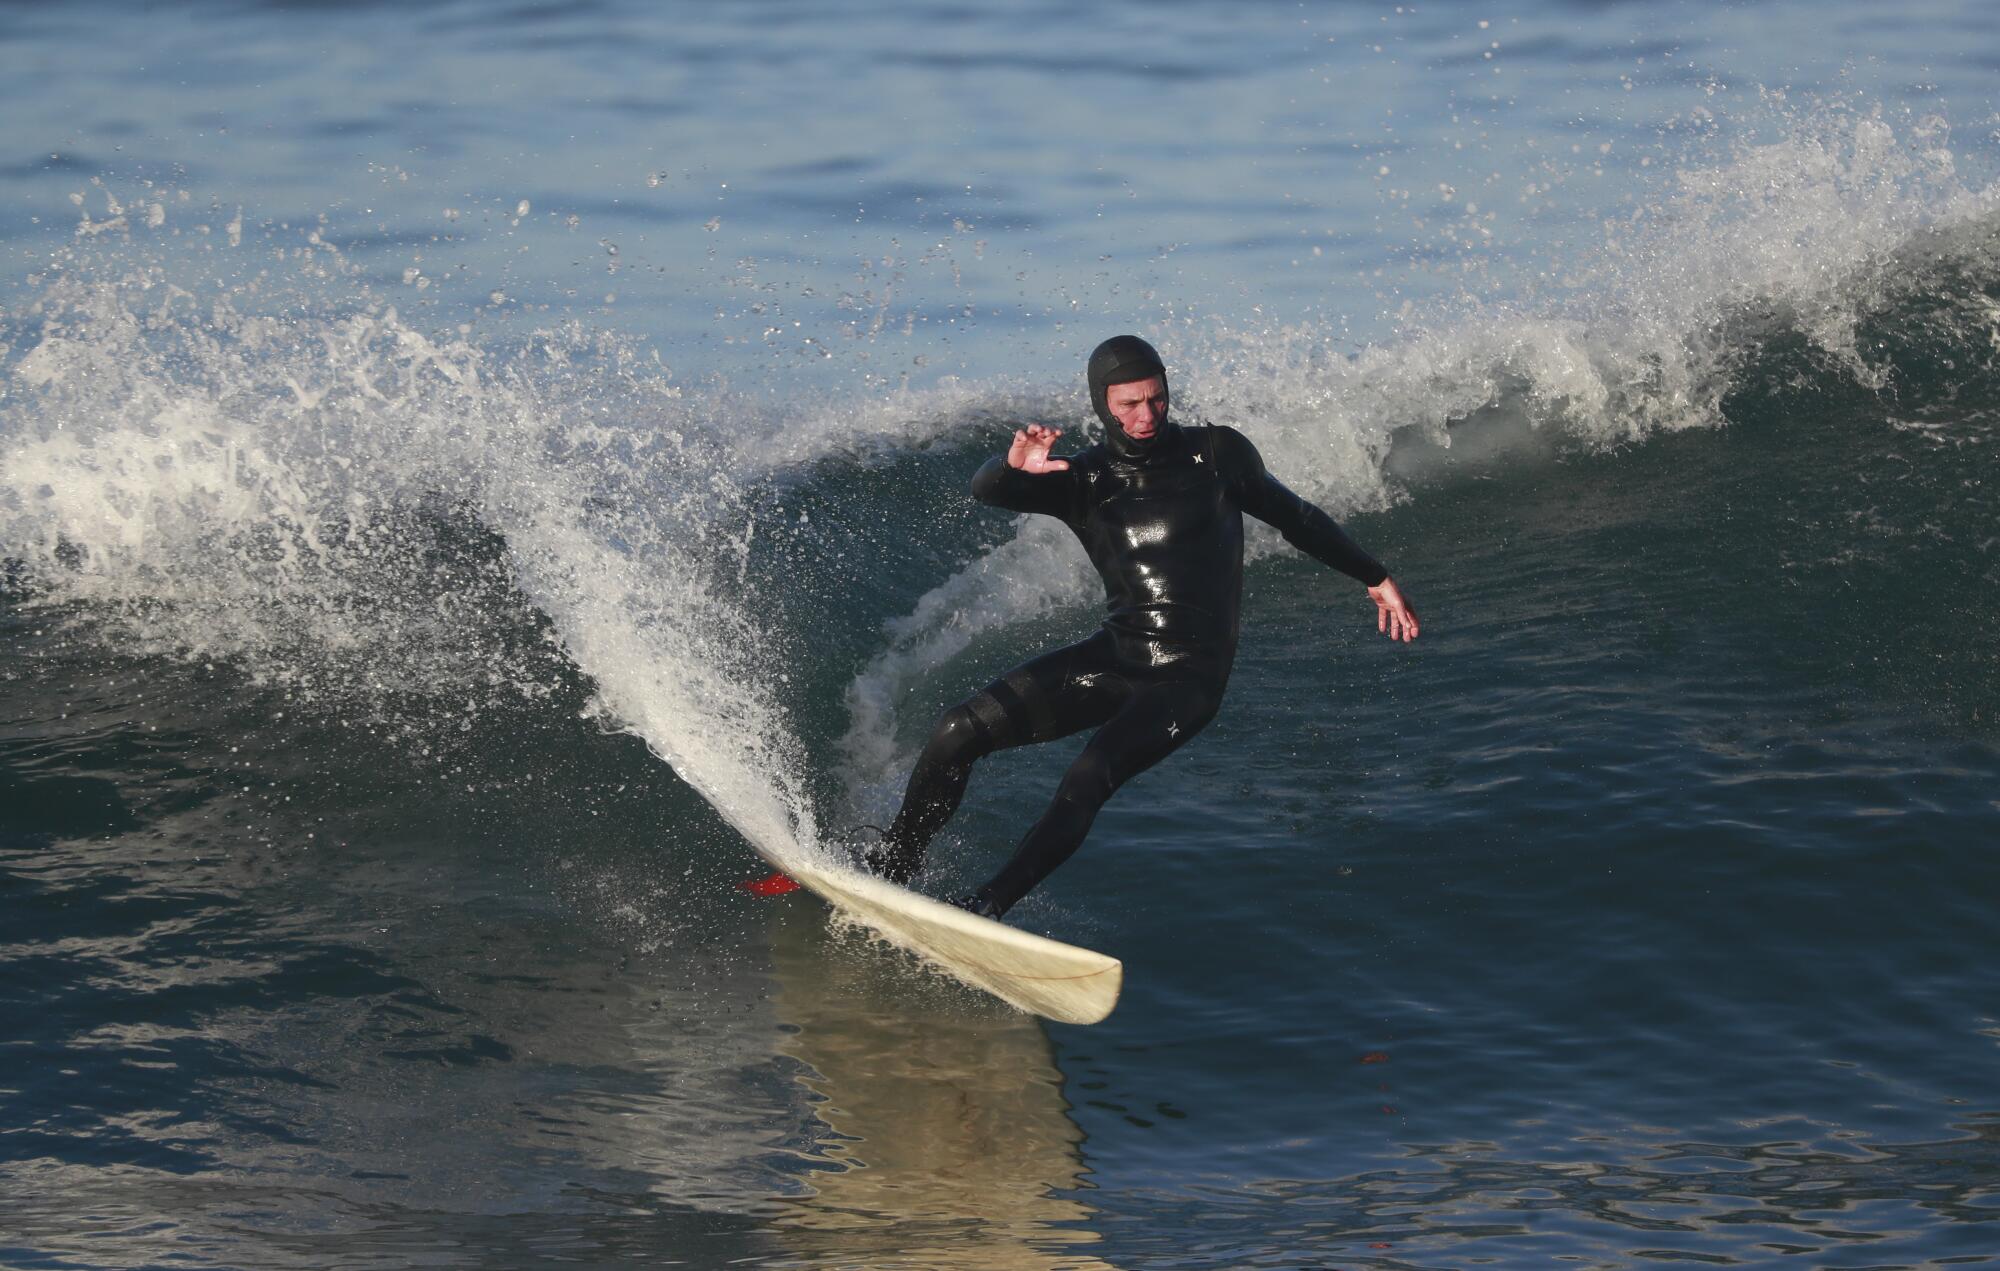 A man in a wetsuit rides a surfboard